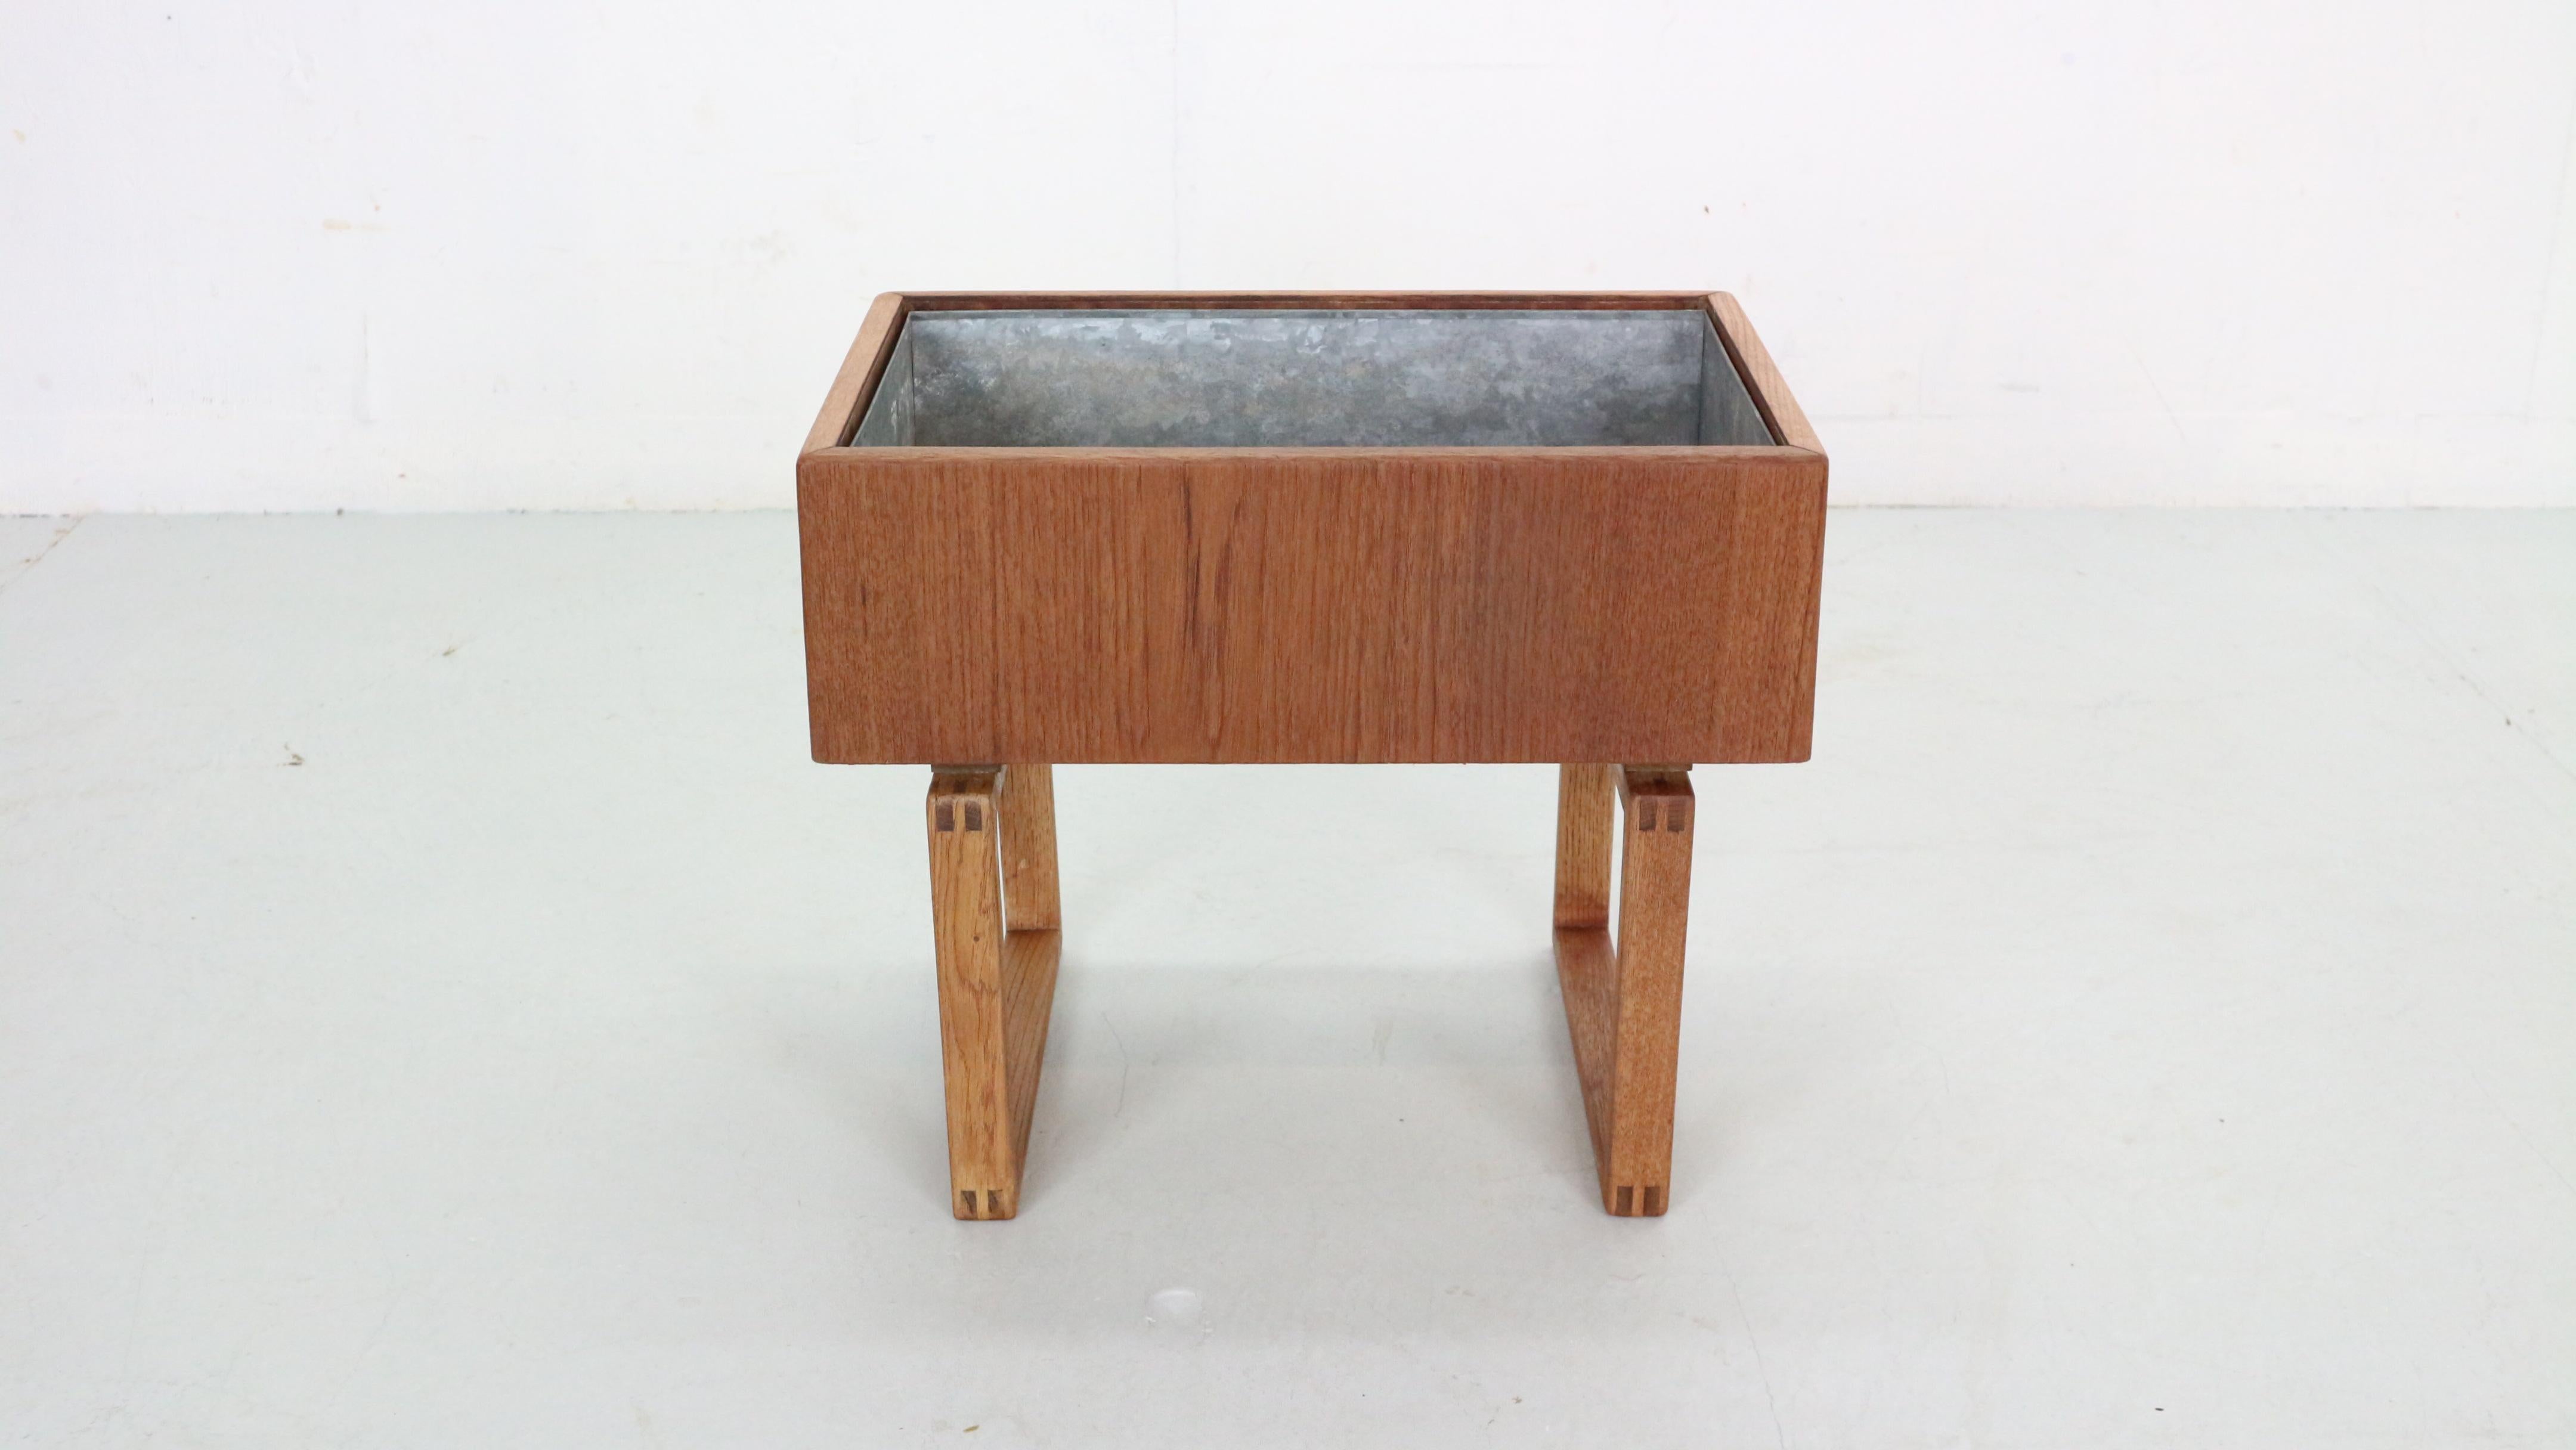 Planter-plant holder designed by Kai Kristiansen and produced by Salin Mobler in 1960s, Denmark.
The square holder feature two sledge feet and a simplistic and modest teak rectangular box. The inside of the box is made of galvanized steel.
A very